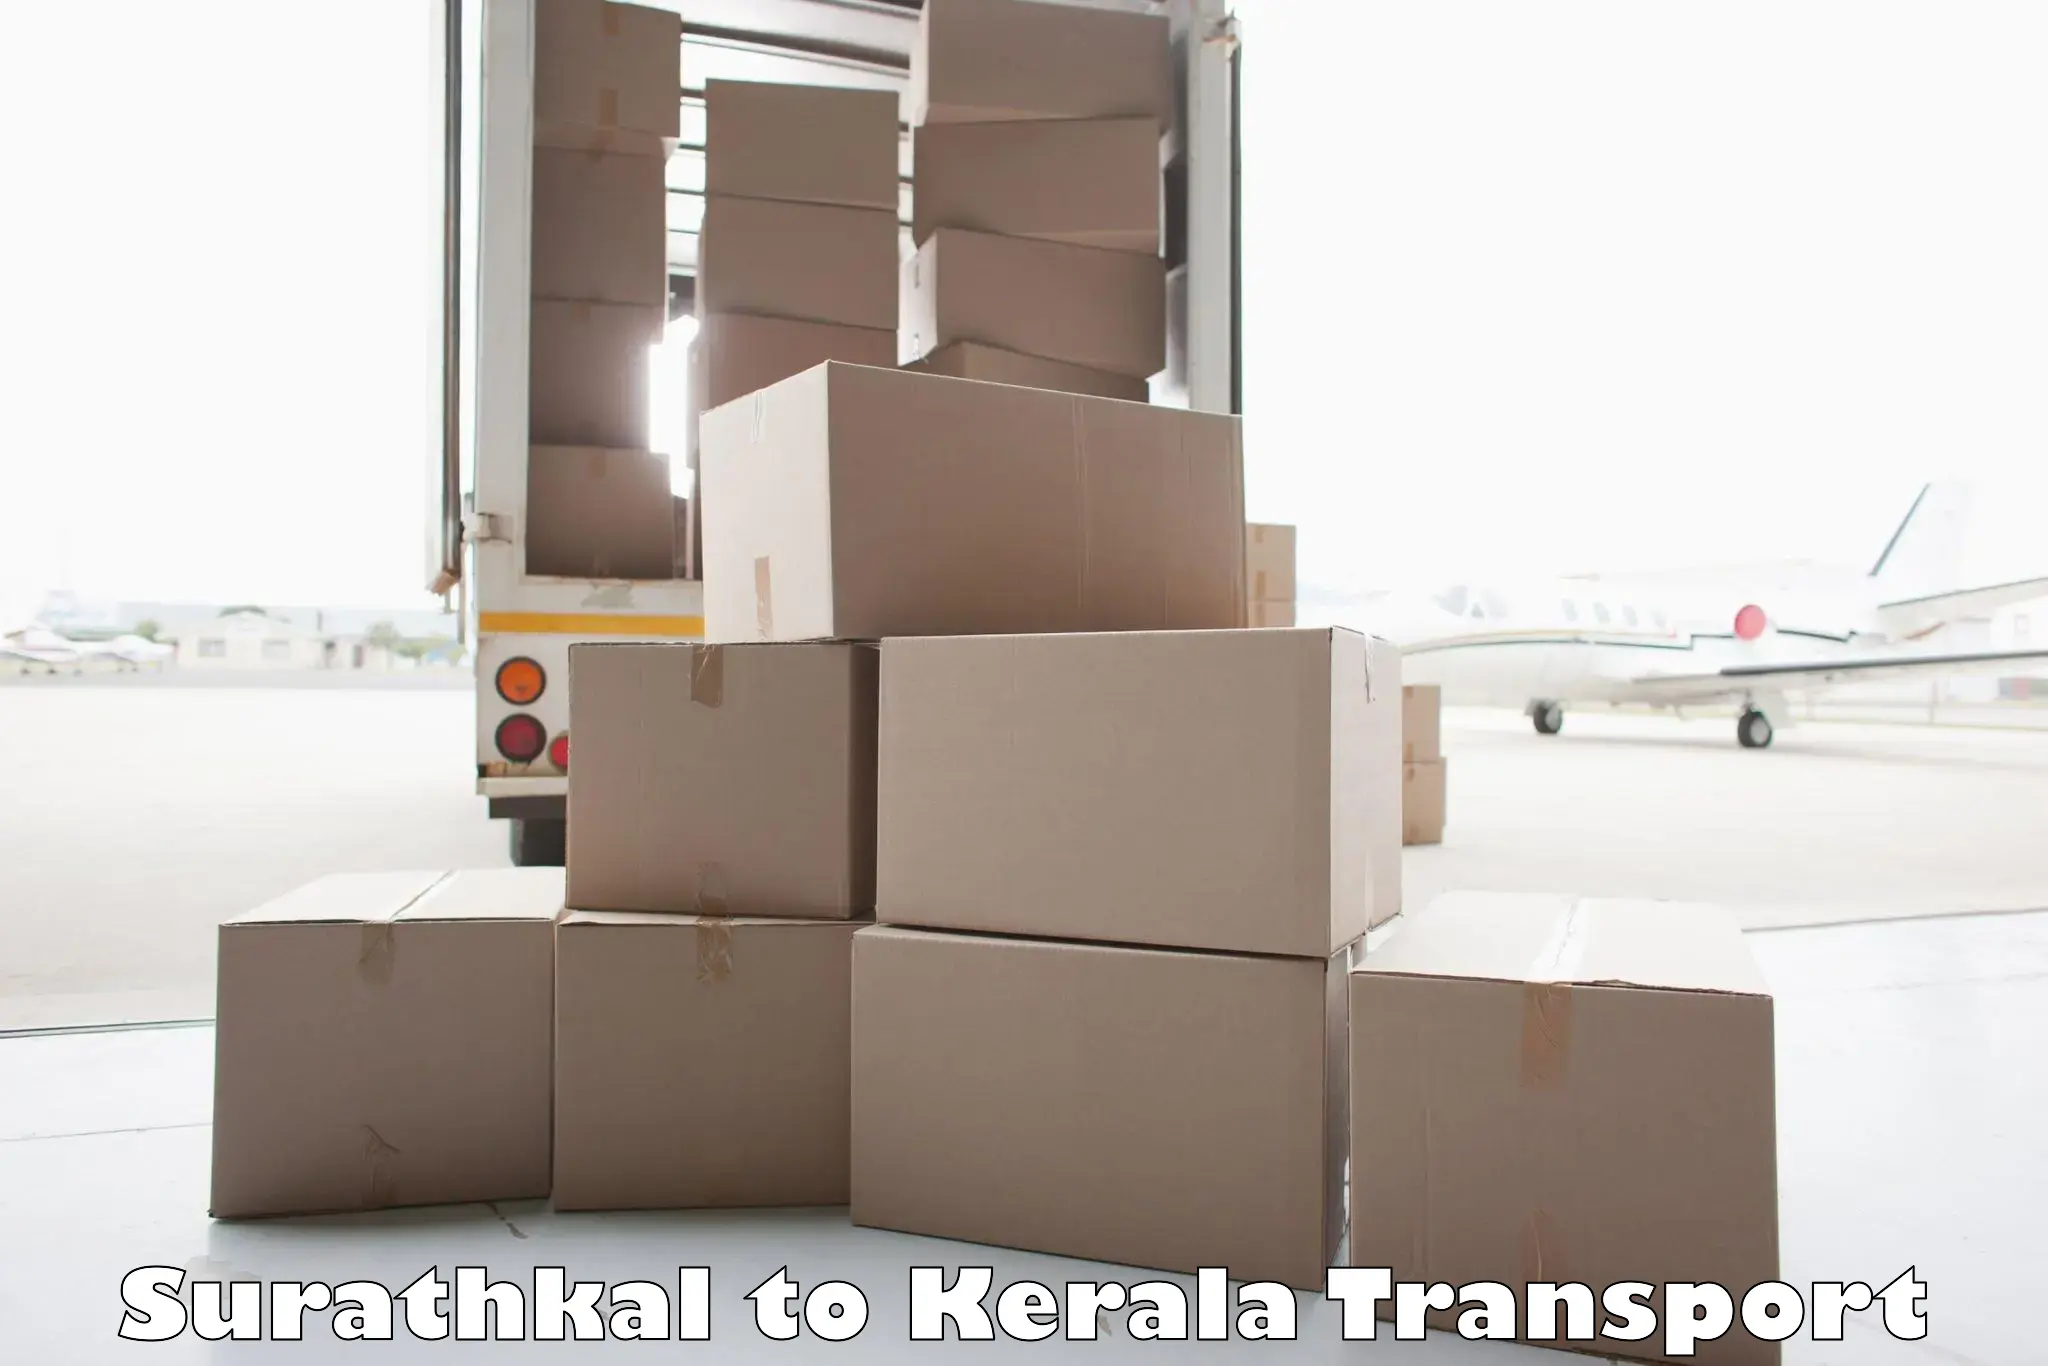 Online transport booking Surathkal to Allepey